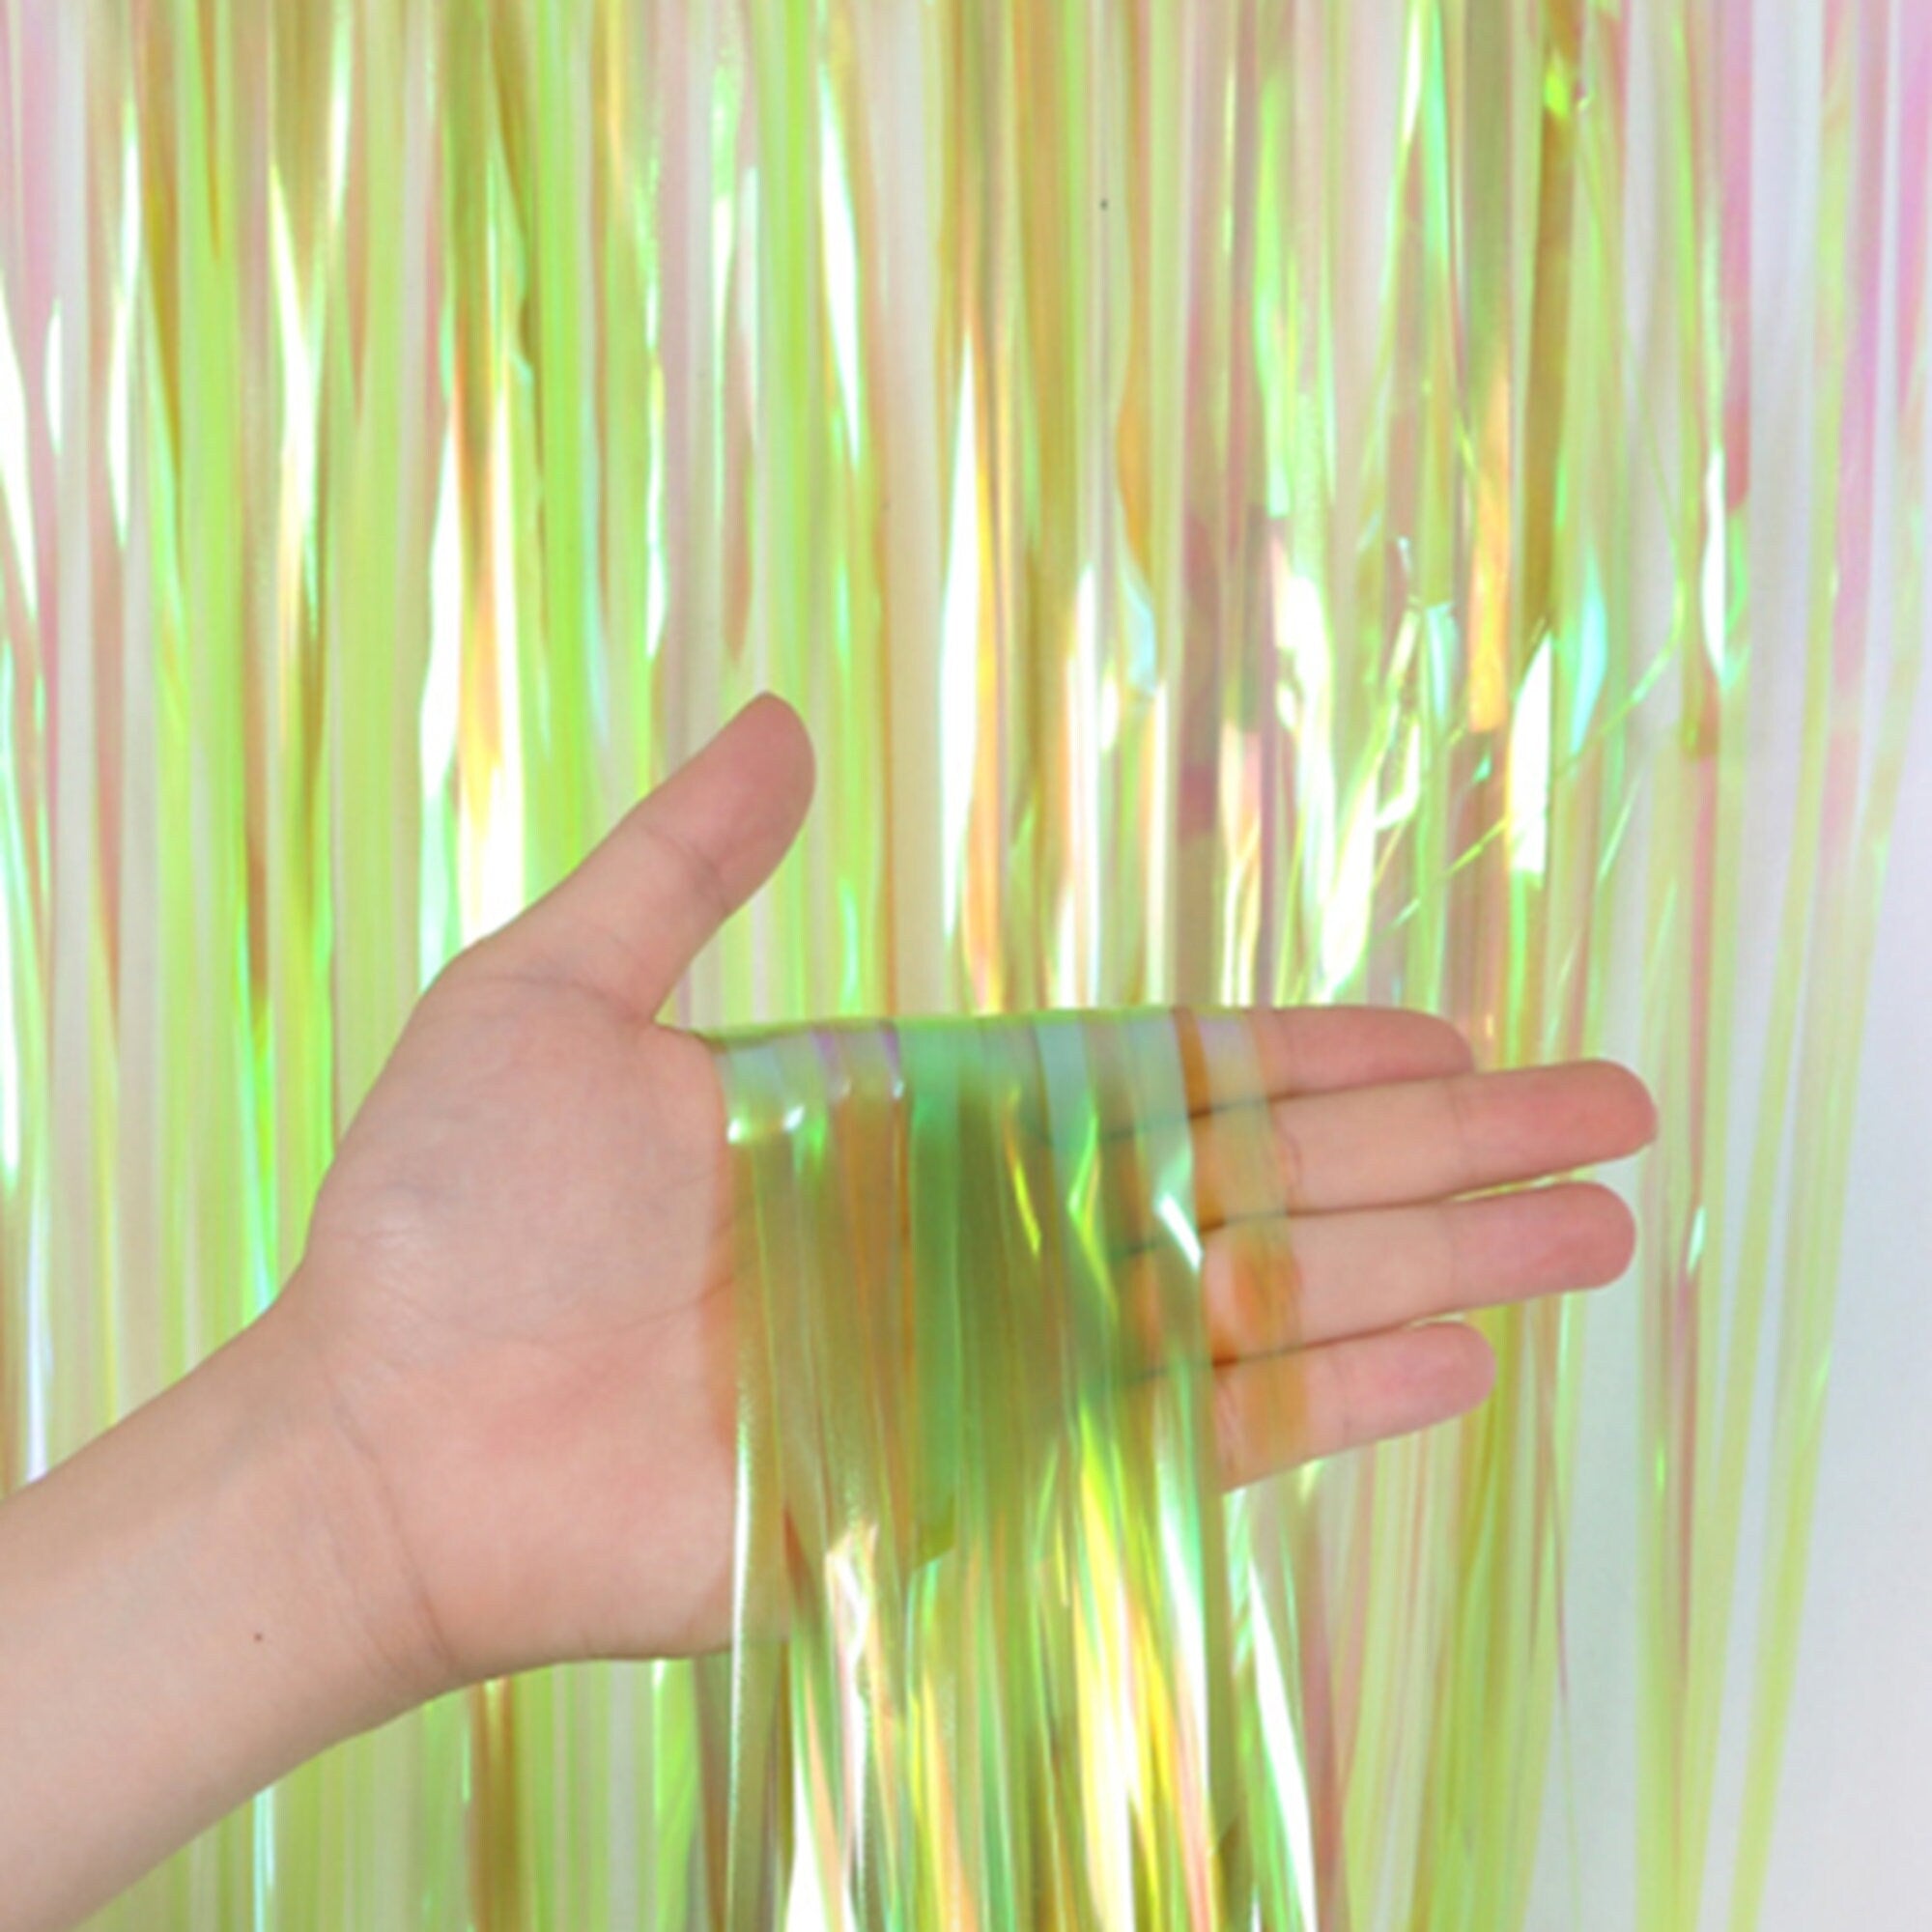 Candy Clear Tinsel Curtain Party Backdrop Event Decor Tassells